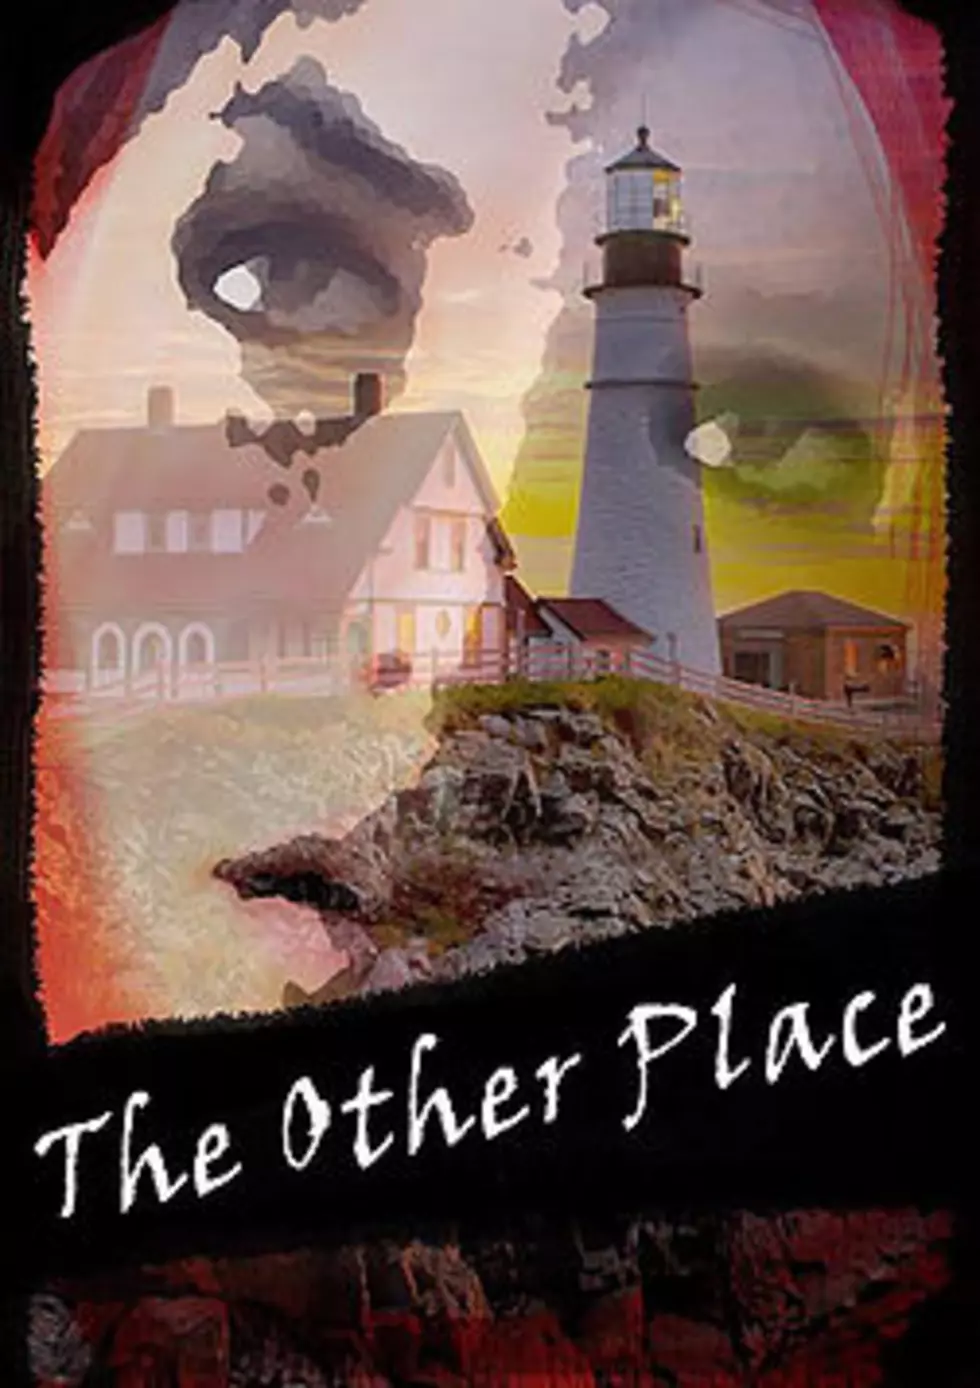 New Local Theatre Company To Stage Inaugural Production: &#8220;The Other Place&#8221;